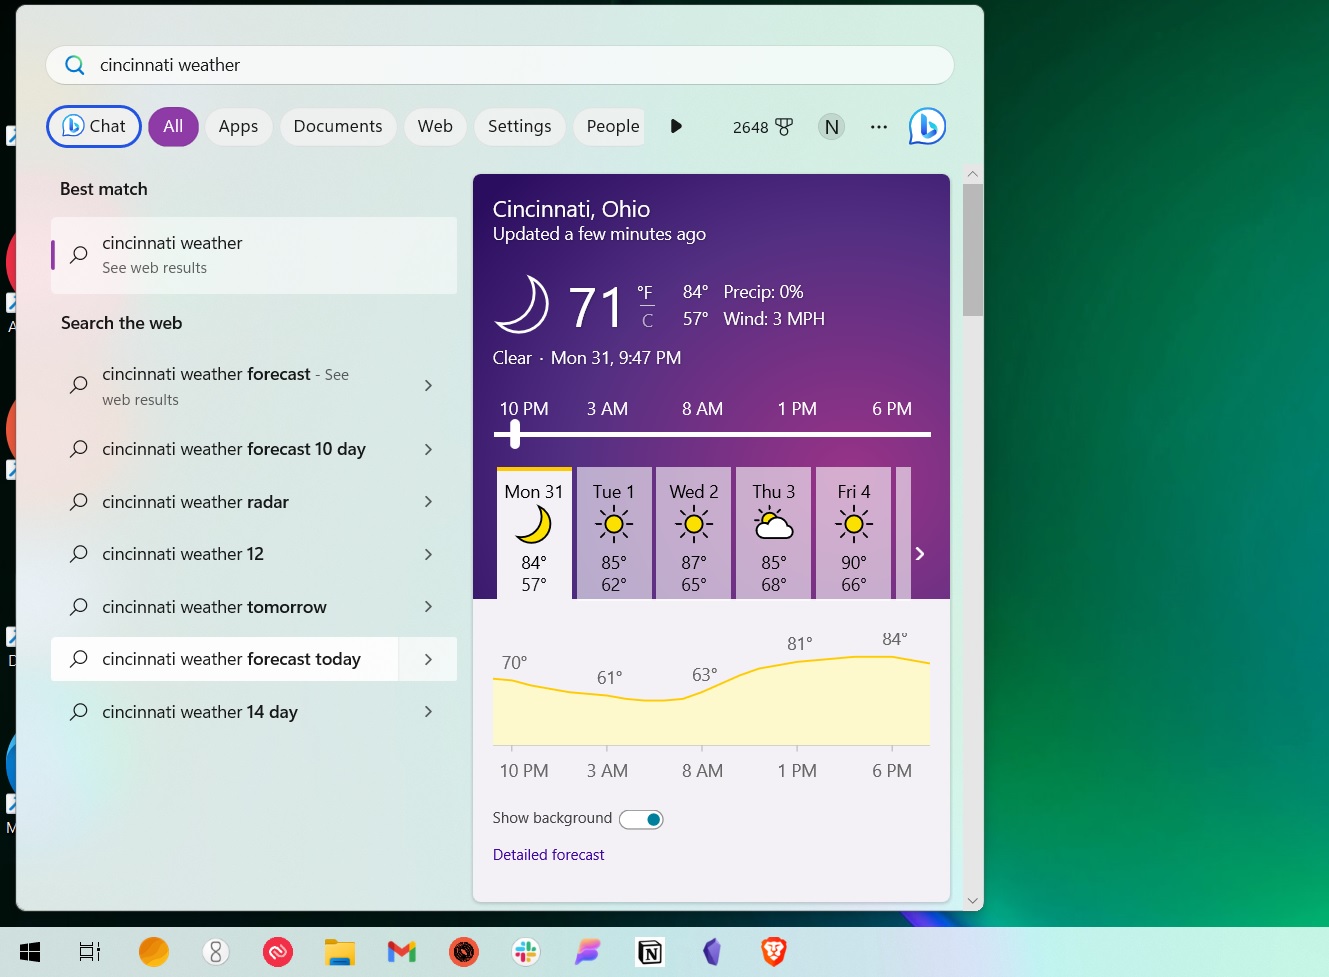 Weather results in Windows search